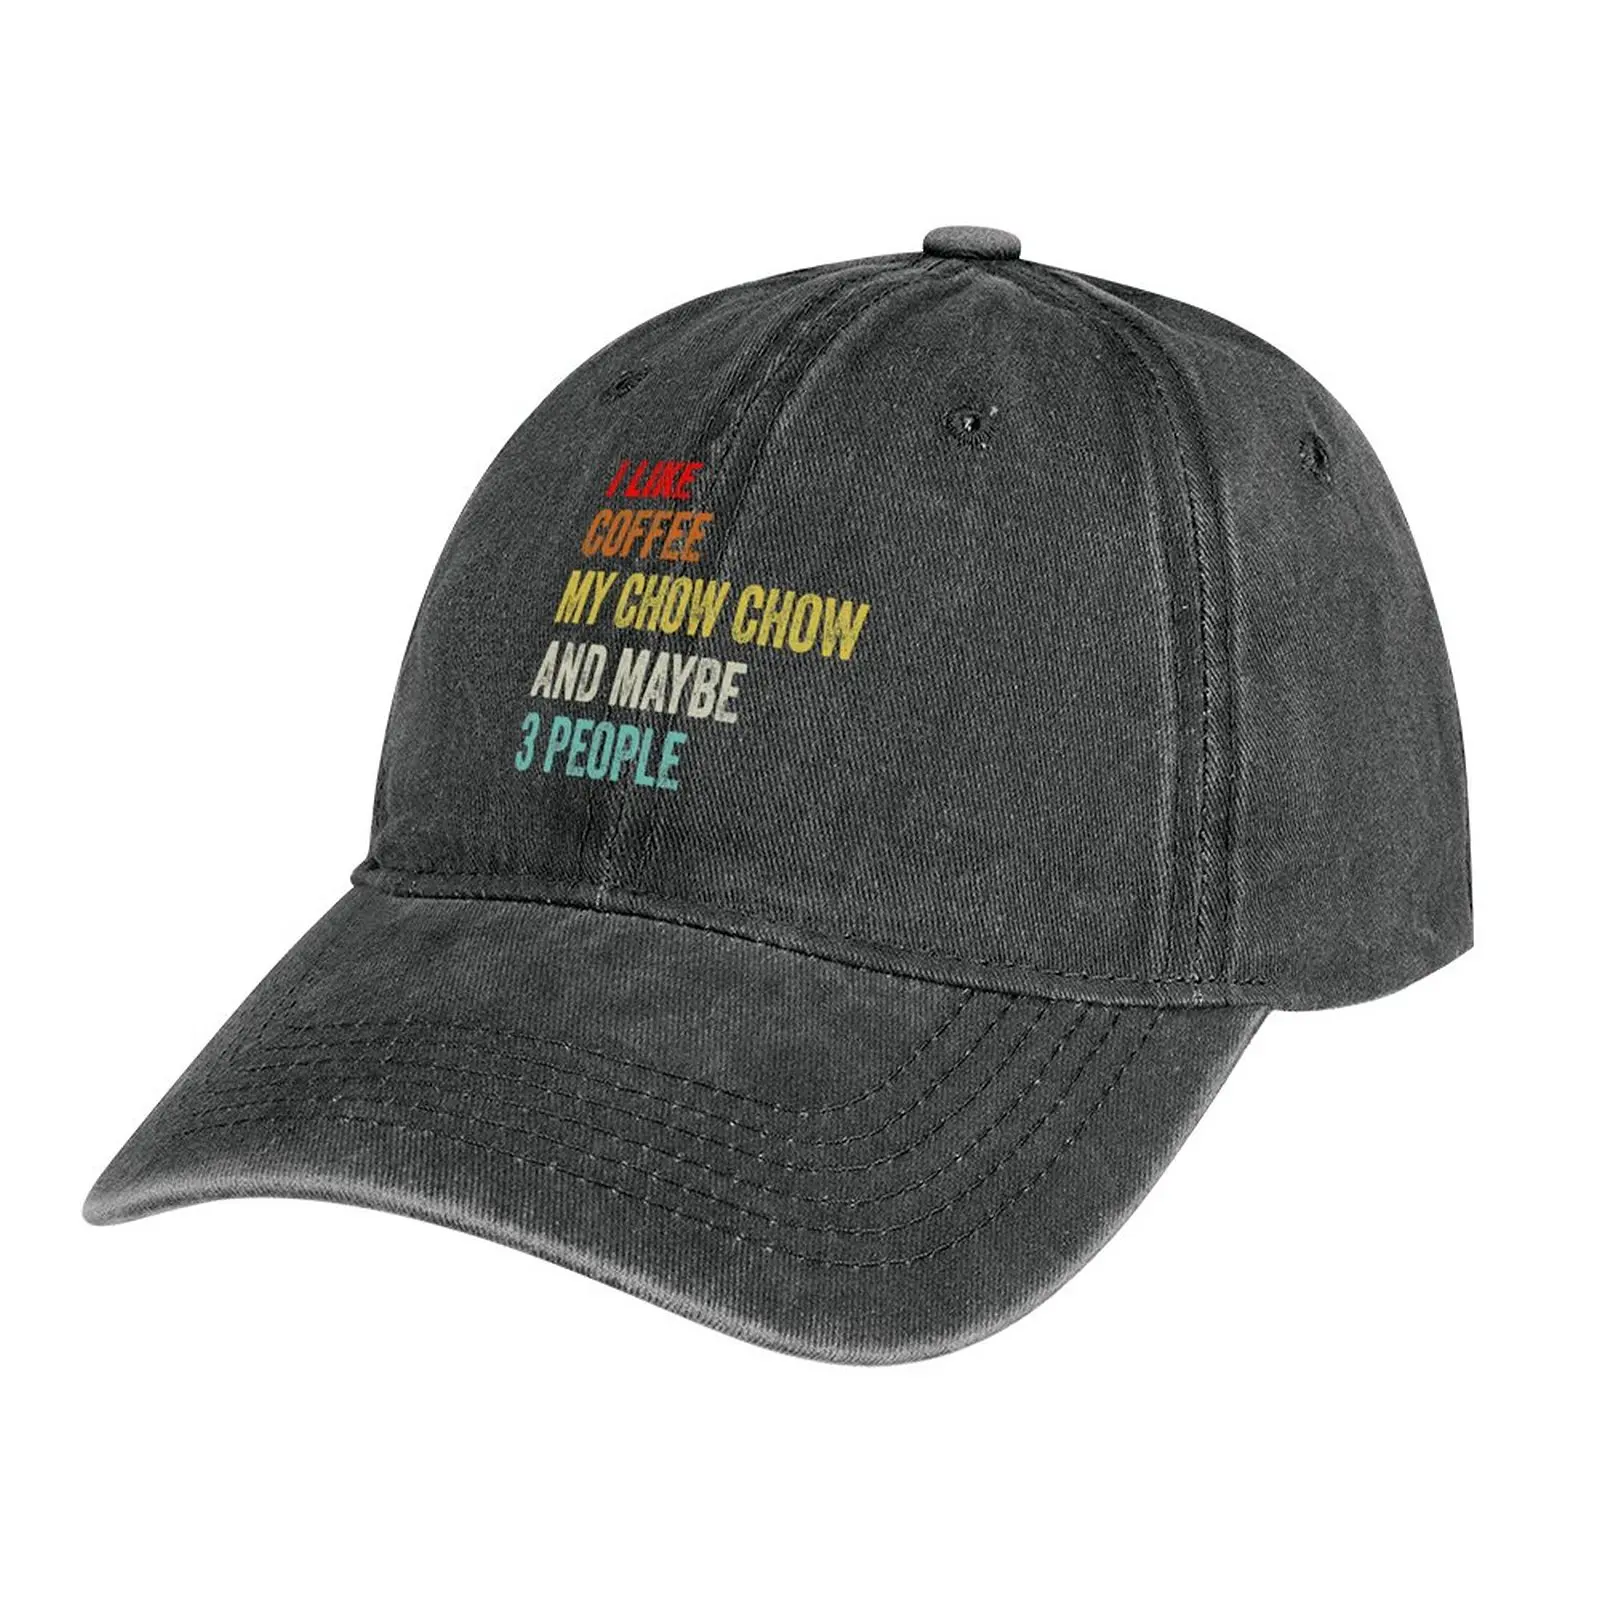 

I like coffee, my chow chow dog and maybe 3 people Cowboy Hat Sports Caps Dropshipping Caps Hat Male Women's